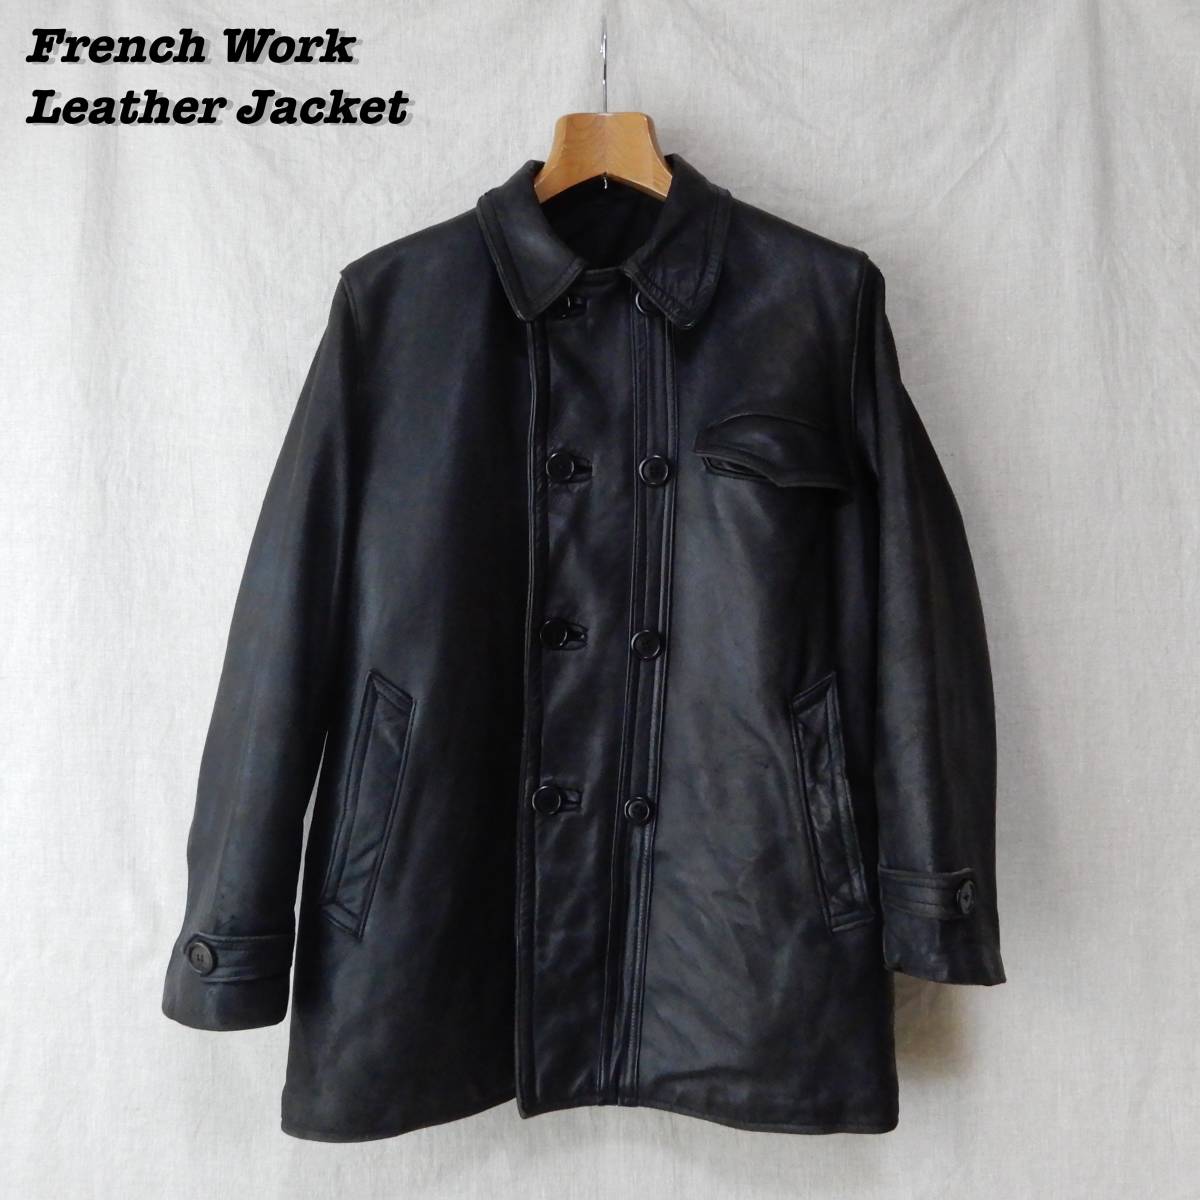 French Work Leather Jacket Black Le Corbusier Jacket Vintage フレンチワーク レザージャケット ダブルブレスト コルビジェジャケット